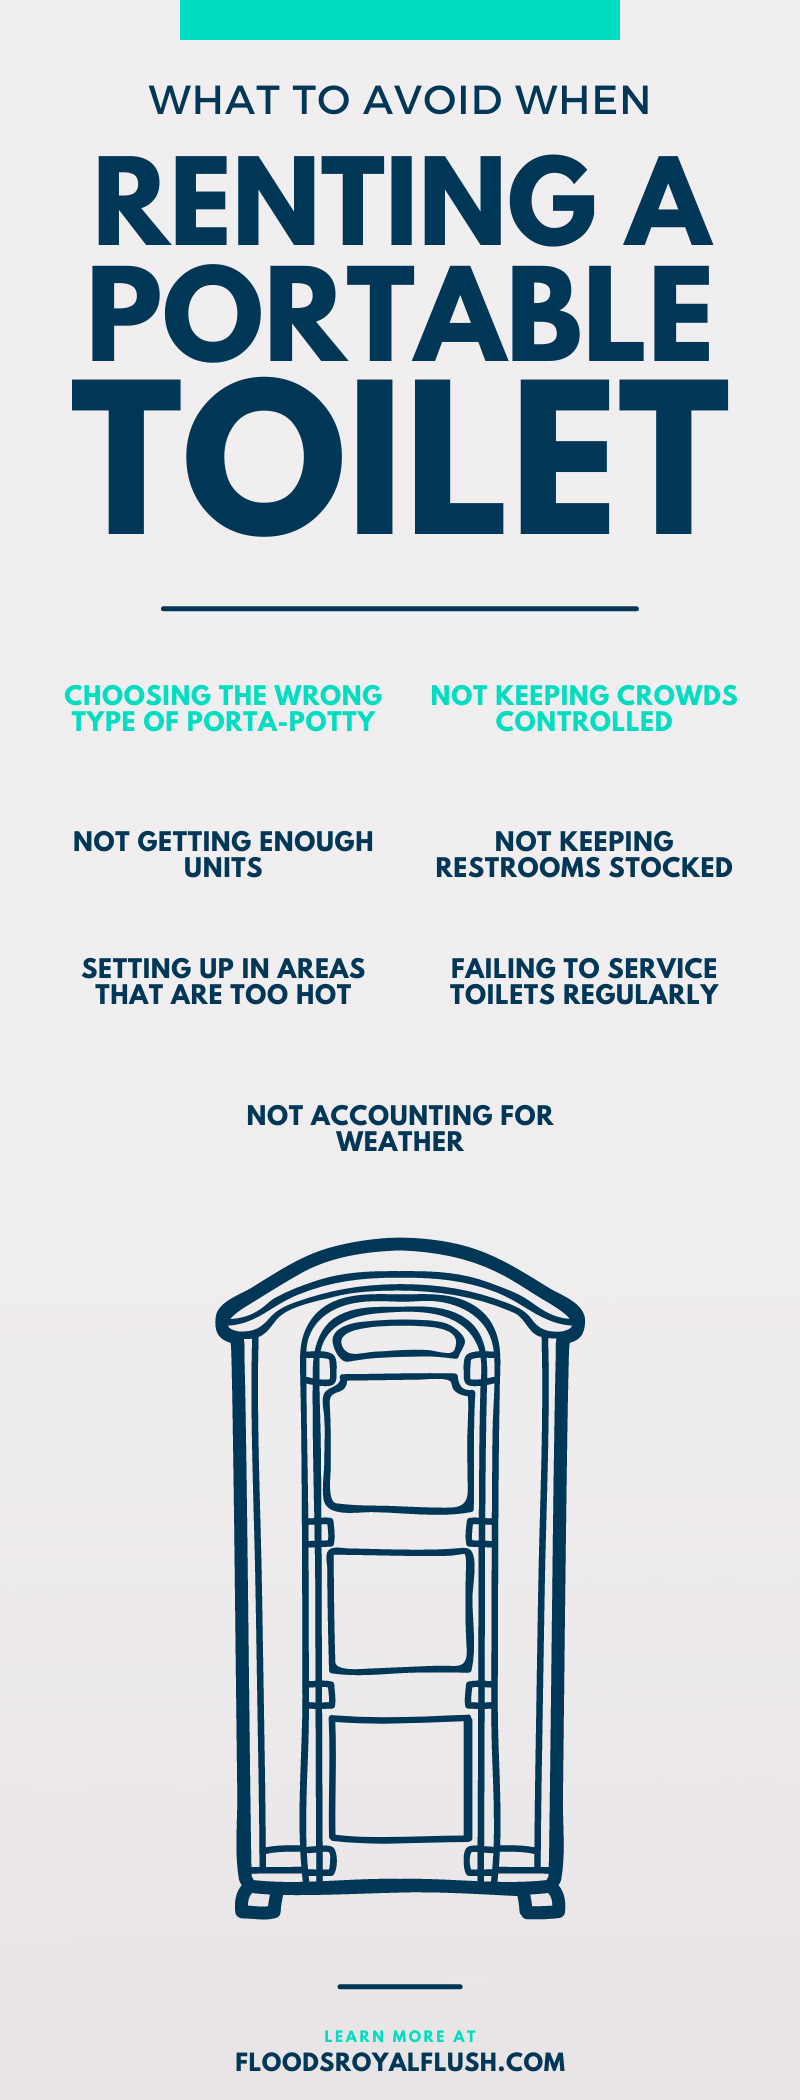 What To Avoid When Renting a Portable Toilet